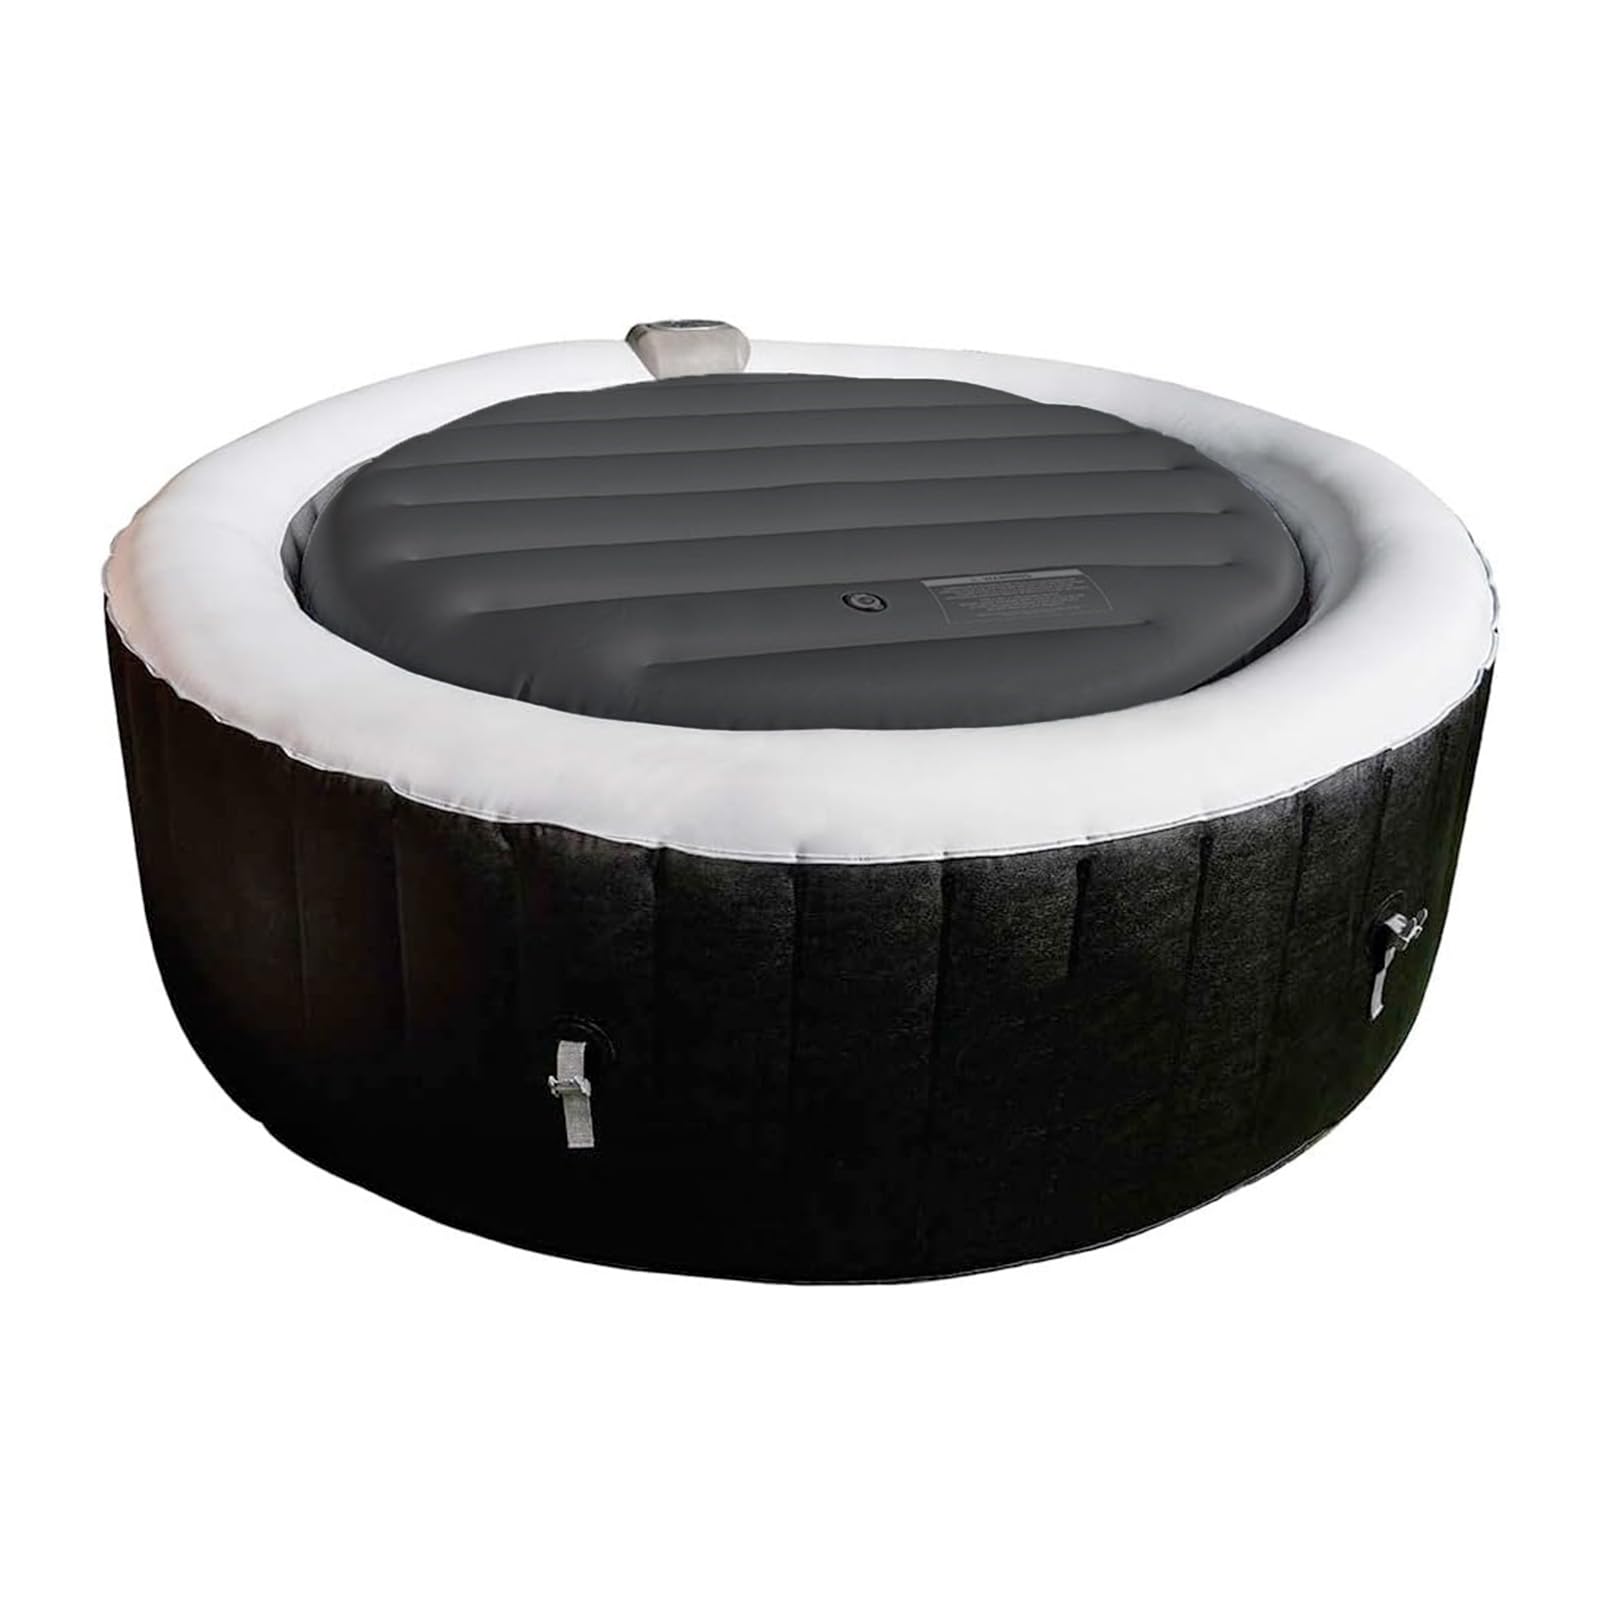 RELXTIME Universal Inflatable Cover Round Top Lid for Hot Tub Spa Cushion Support | Ø 65in, Black